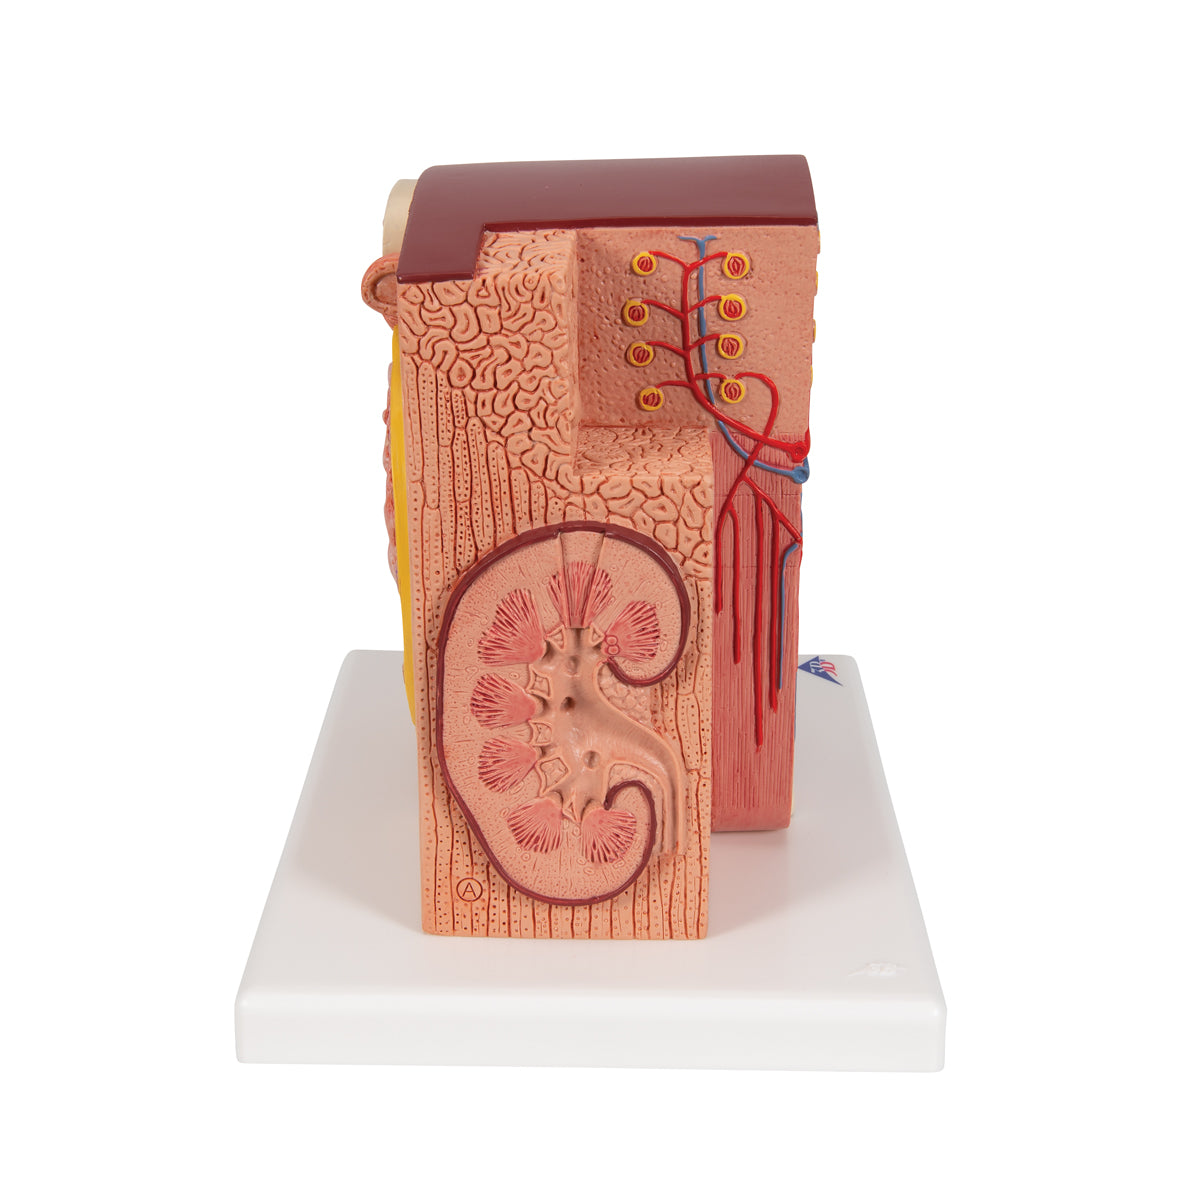 Detailed model of the different tissues and cells of the kidney in a microscopic perspective